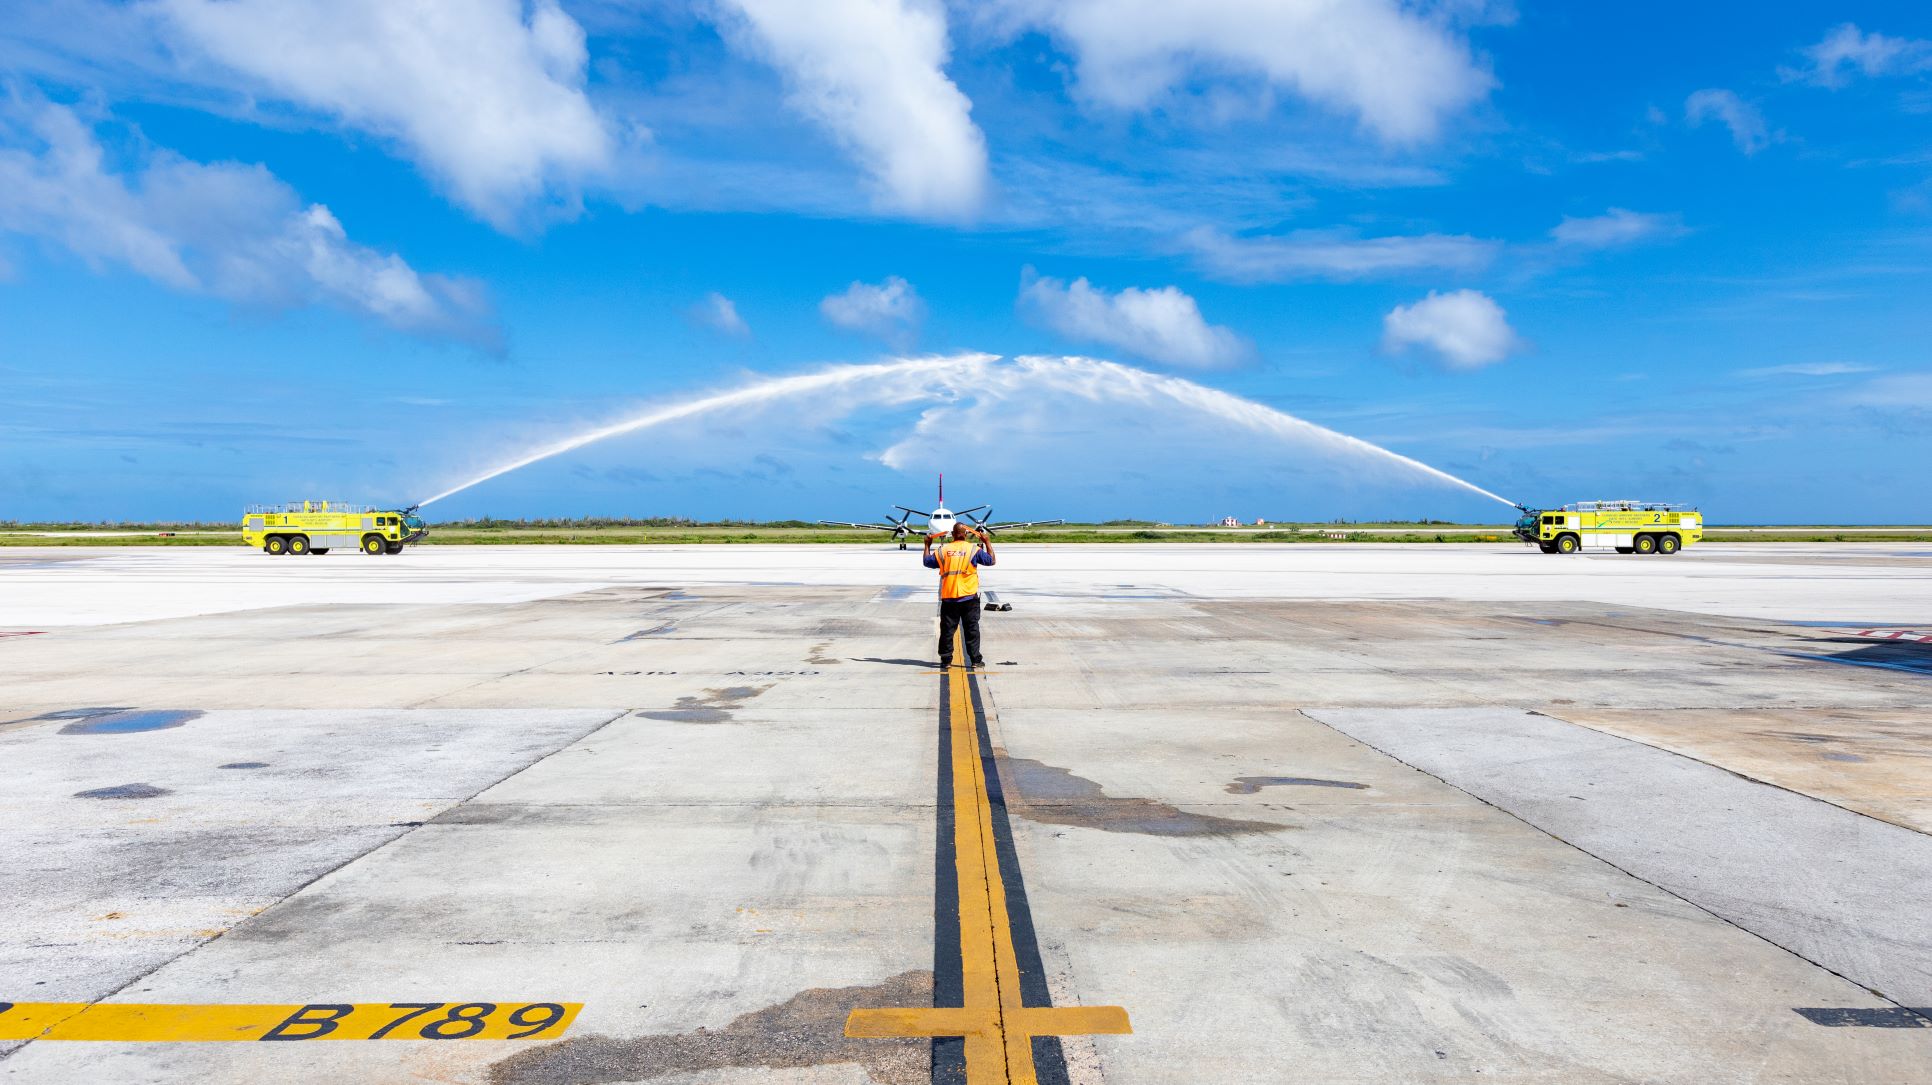 Celebrating EZ Air’s inaugural flight on the Curaçao – Medellín Route